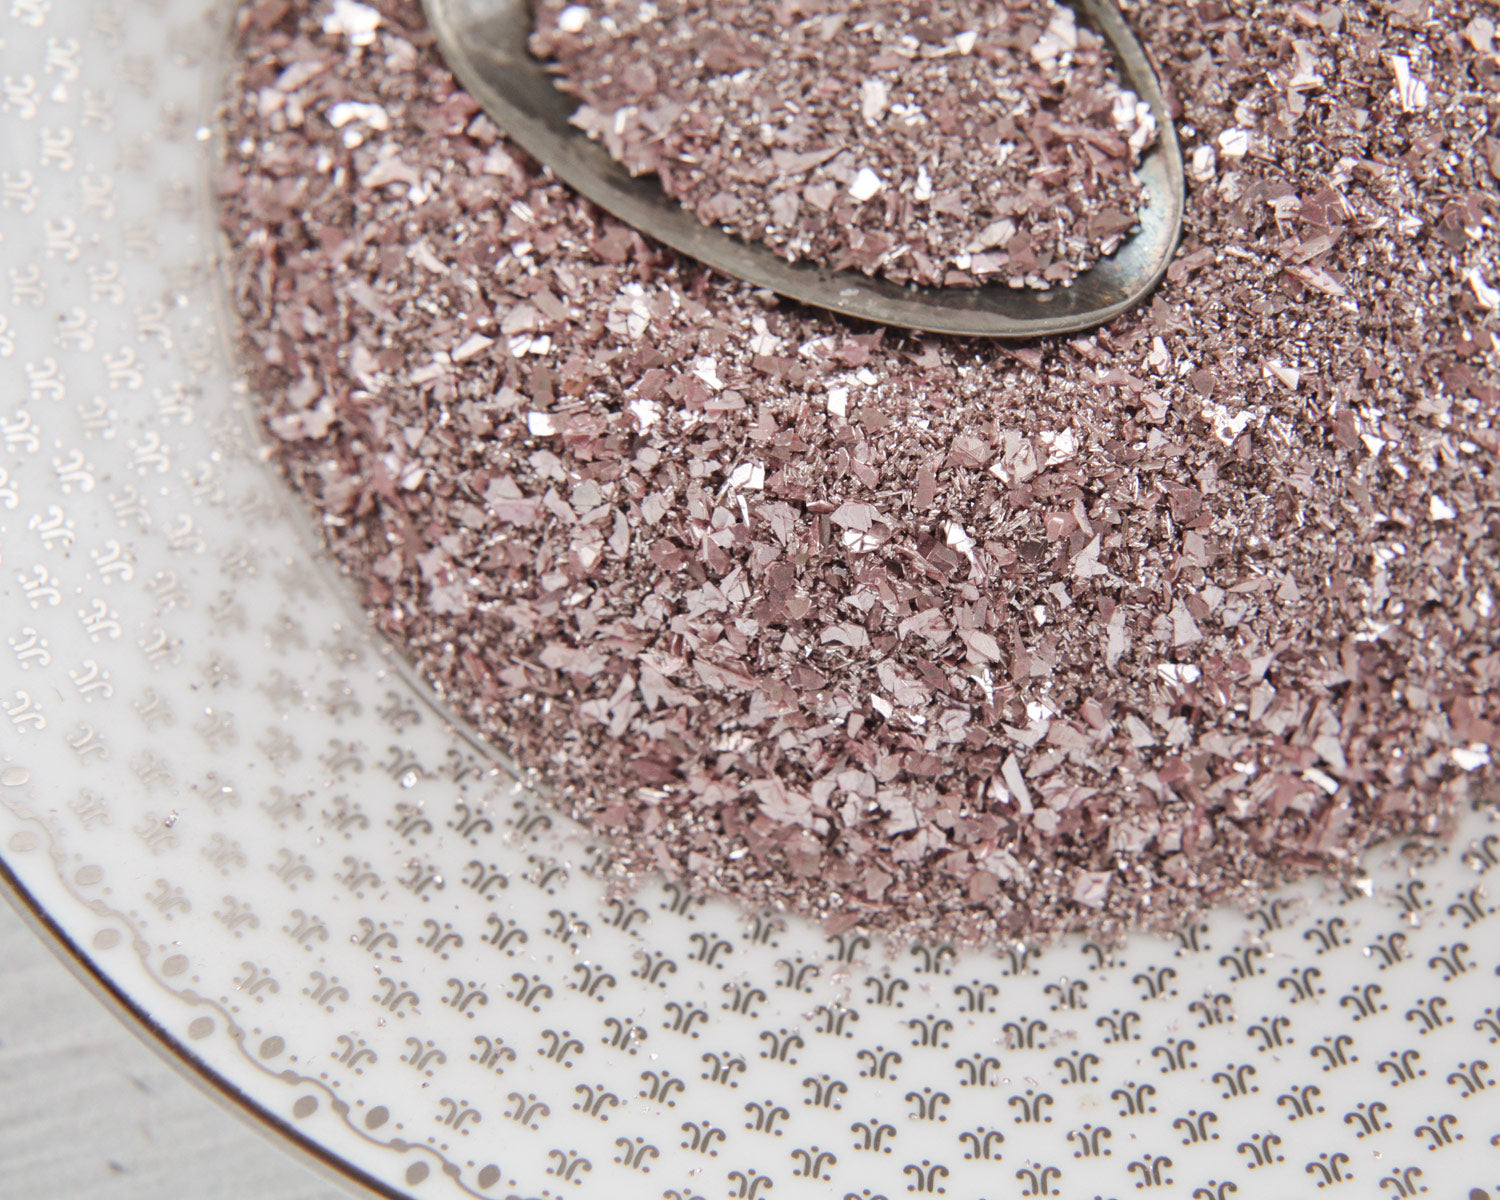 How to Apply German Glass Glitter 